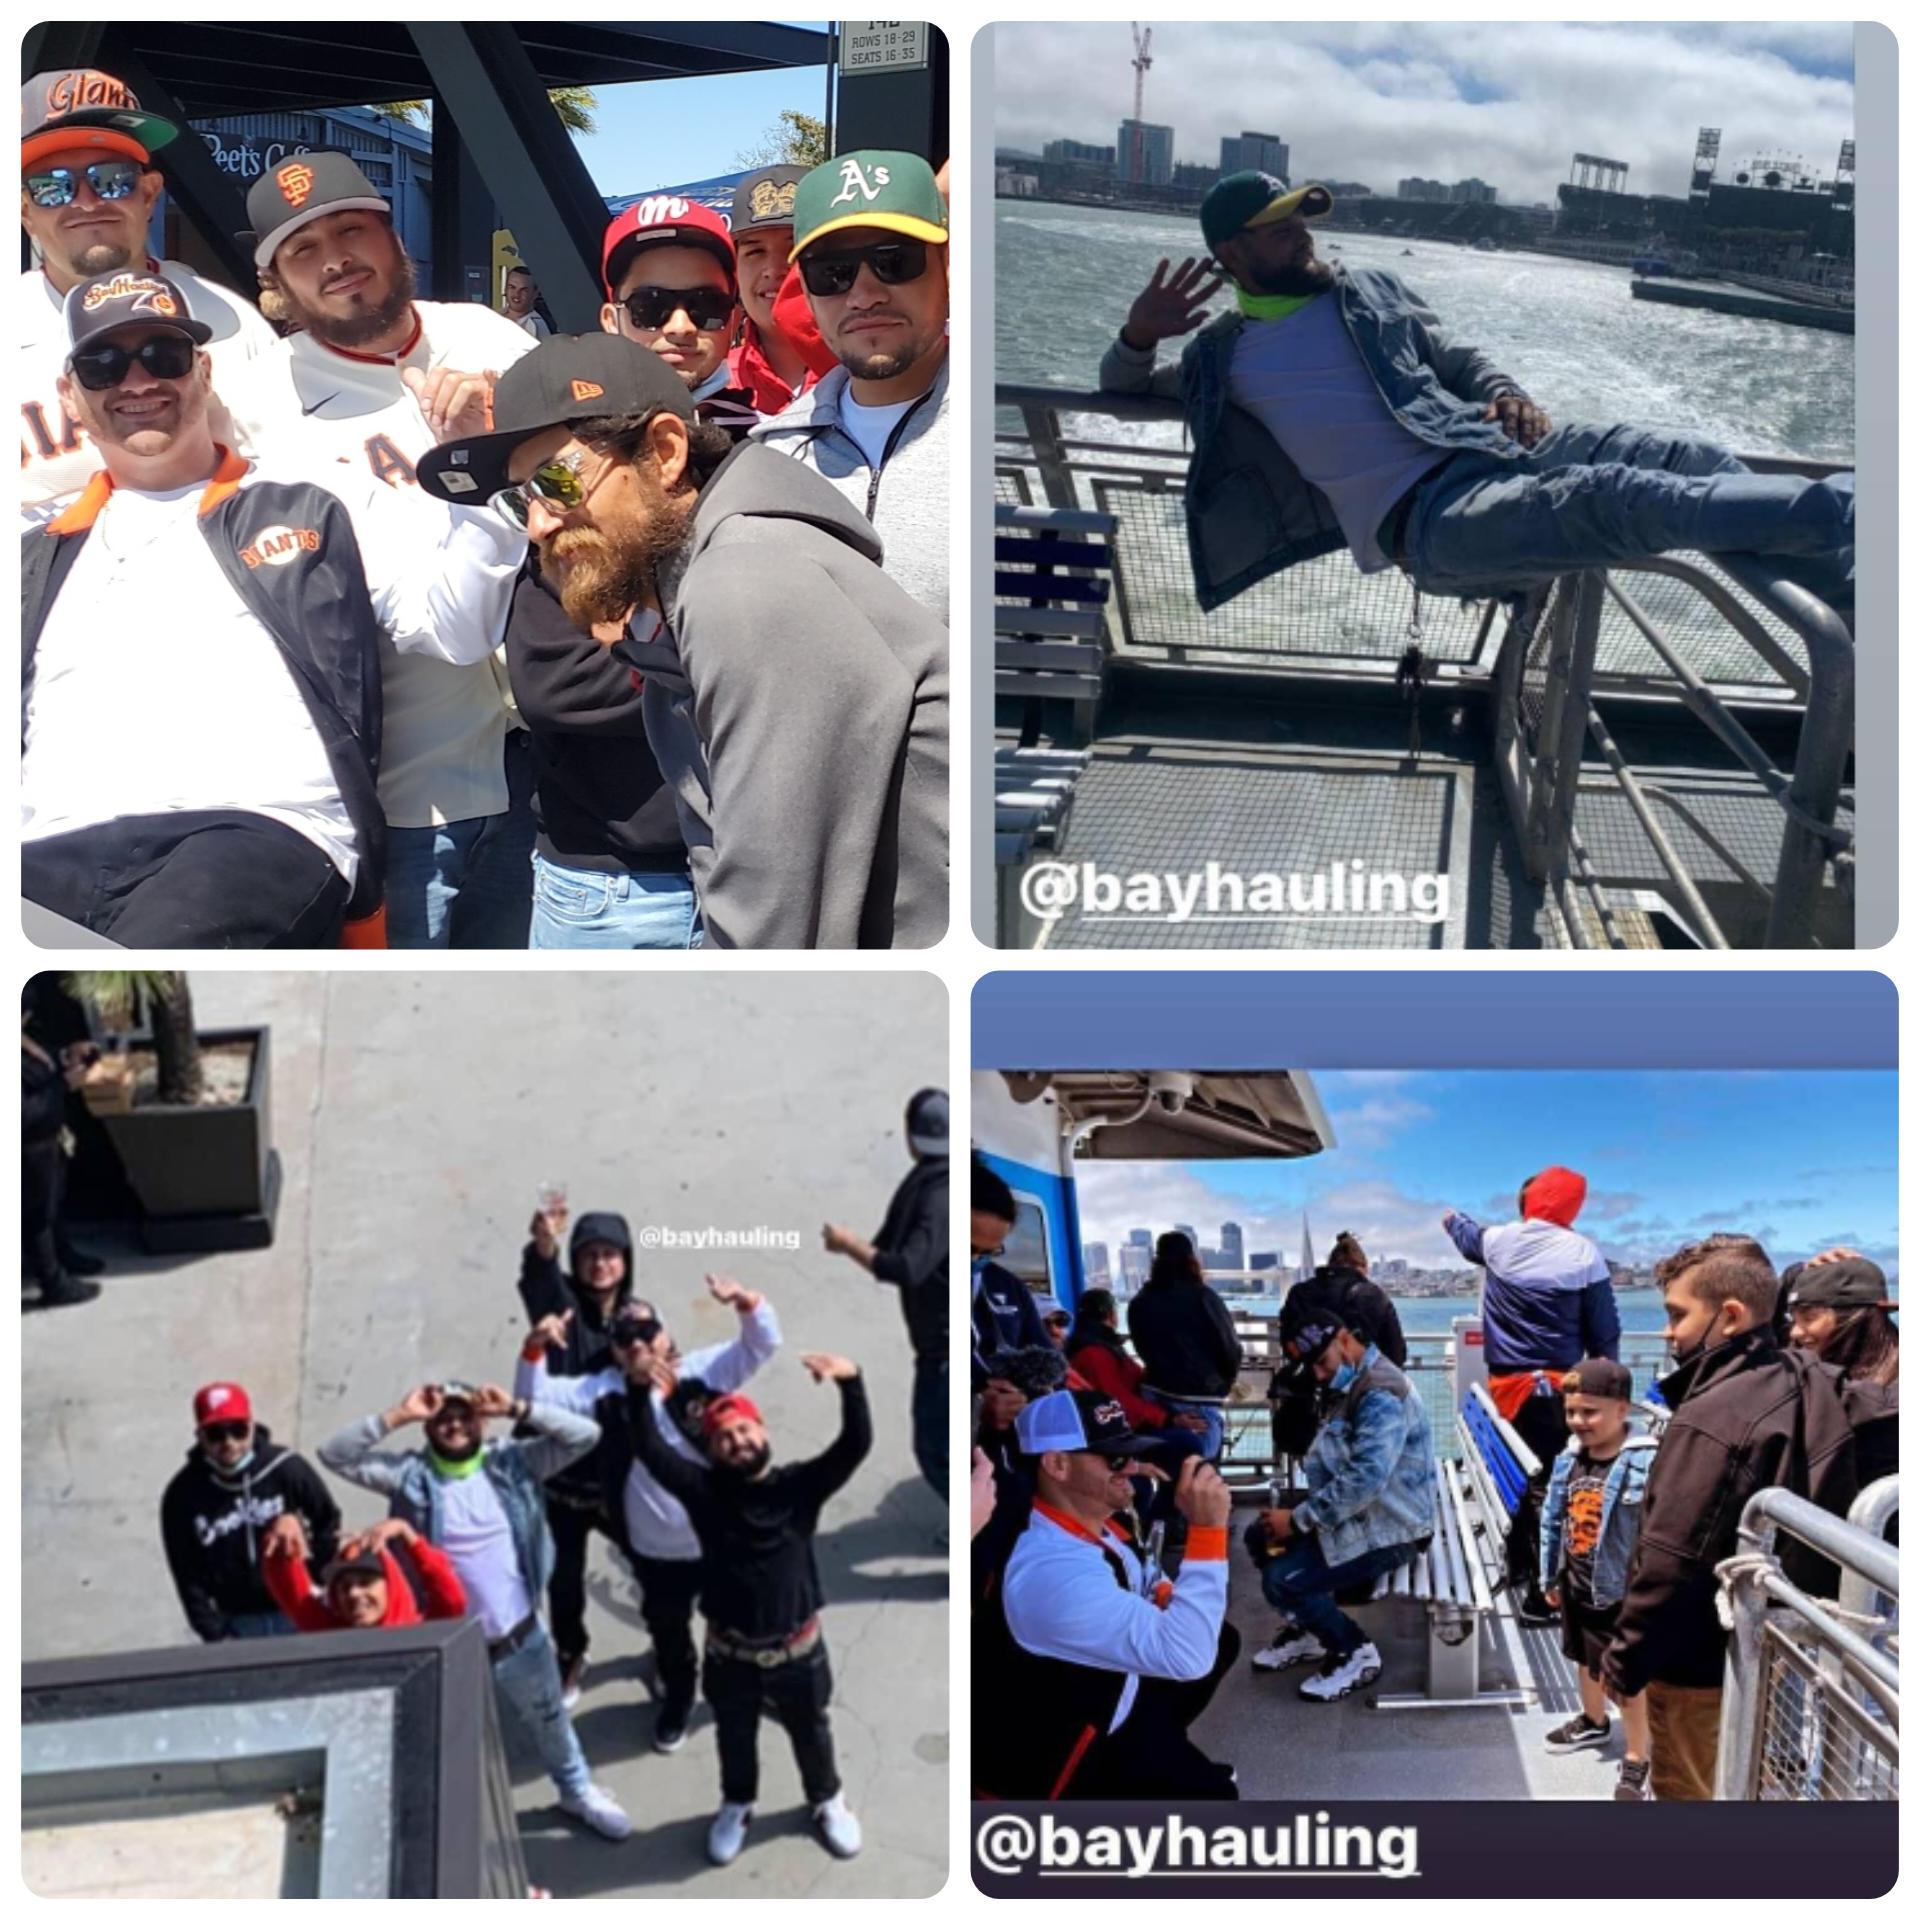 Collage of Bay Hauling professionals and guests enjoying their company outing